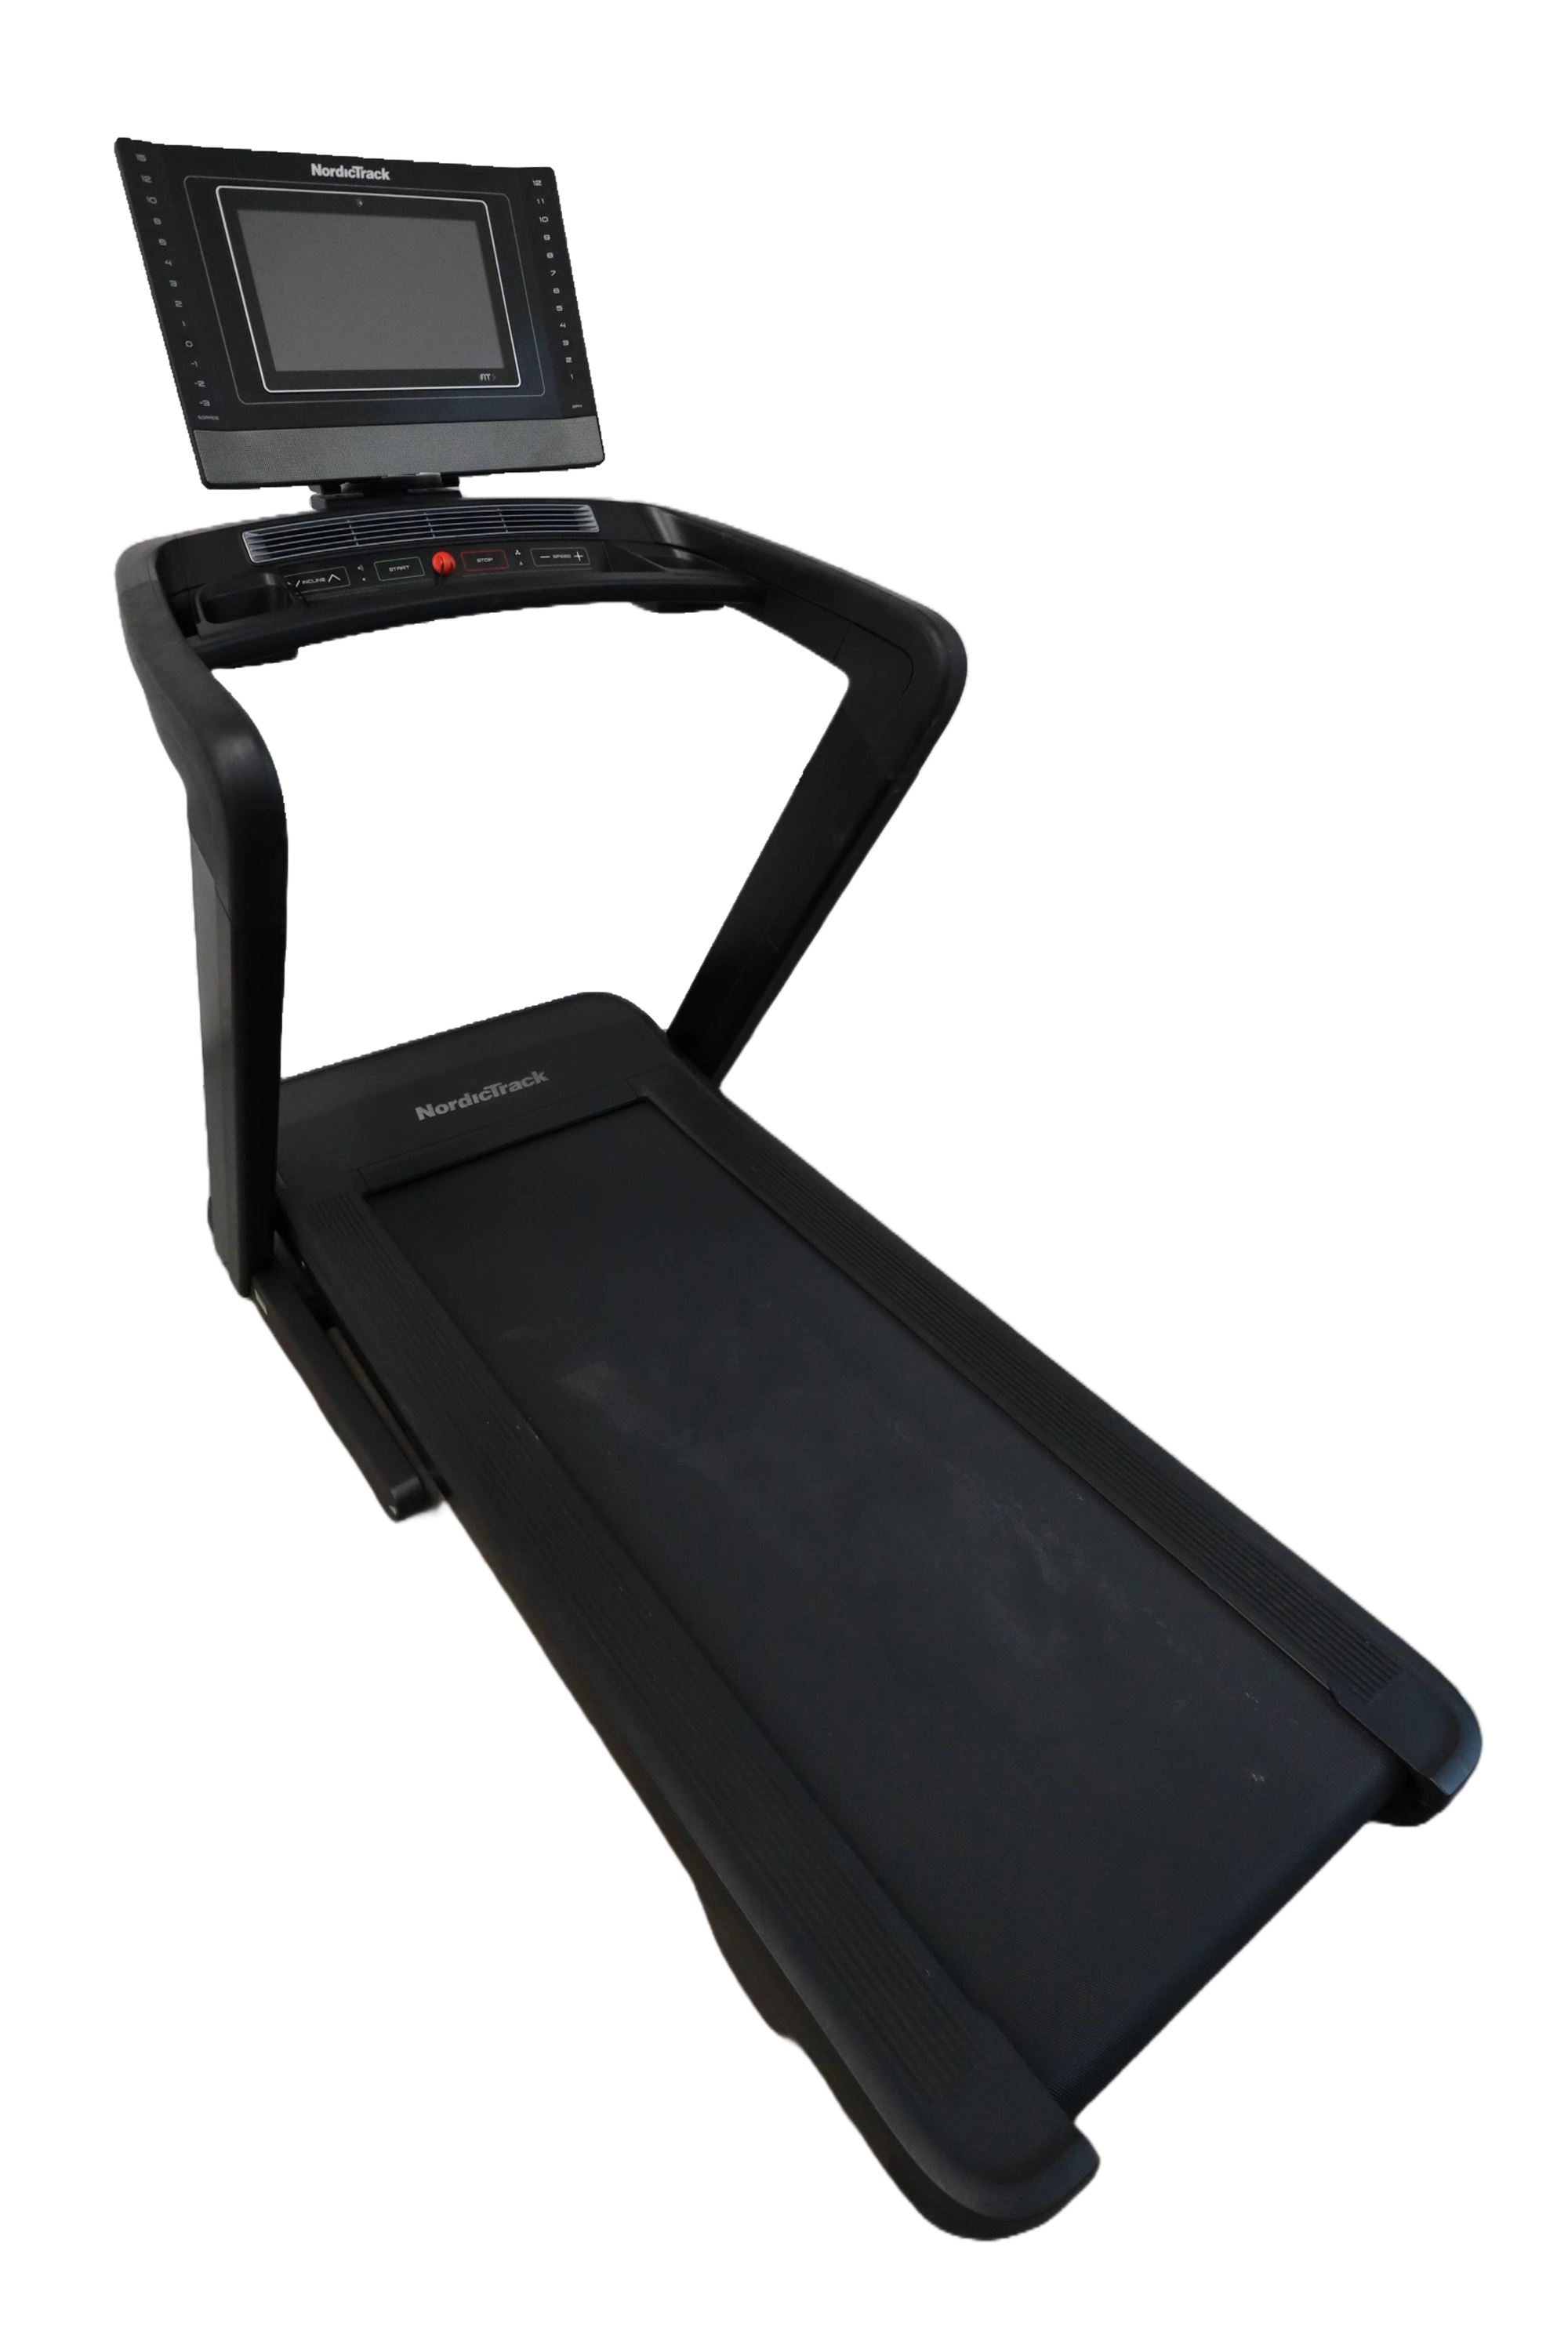 Used NordicTrack Commercial 1750 NTL141222 Folding Treadmill